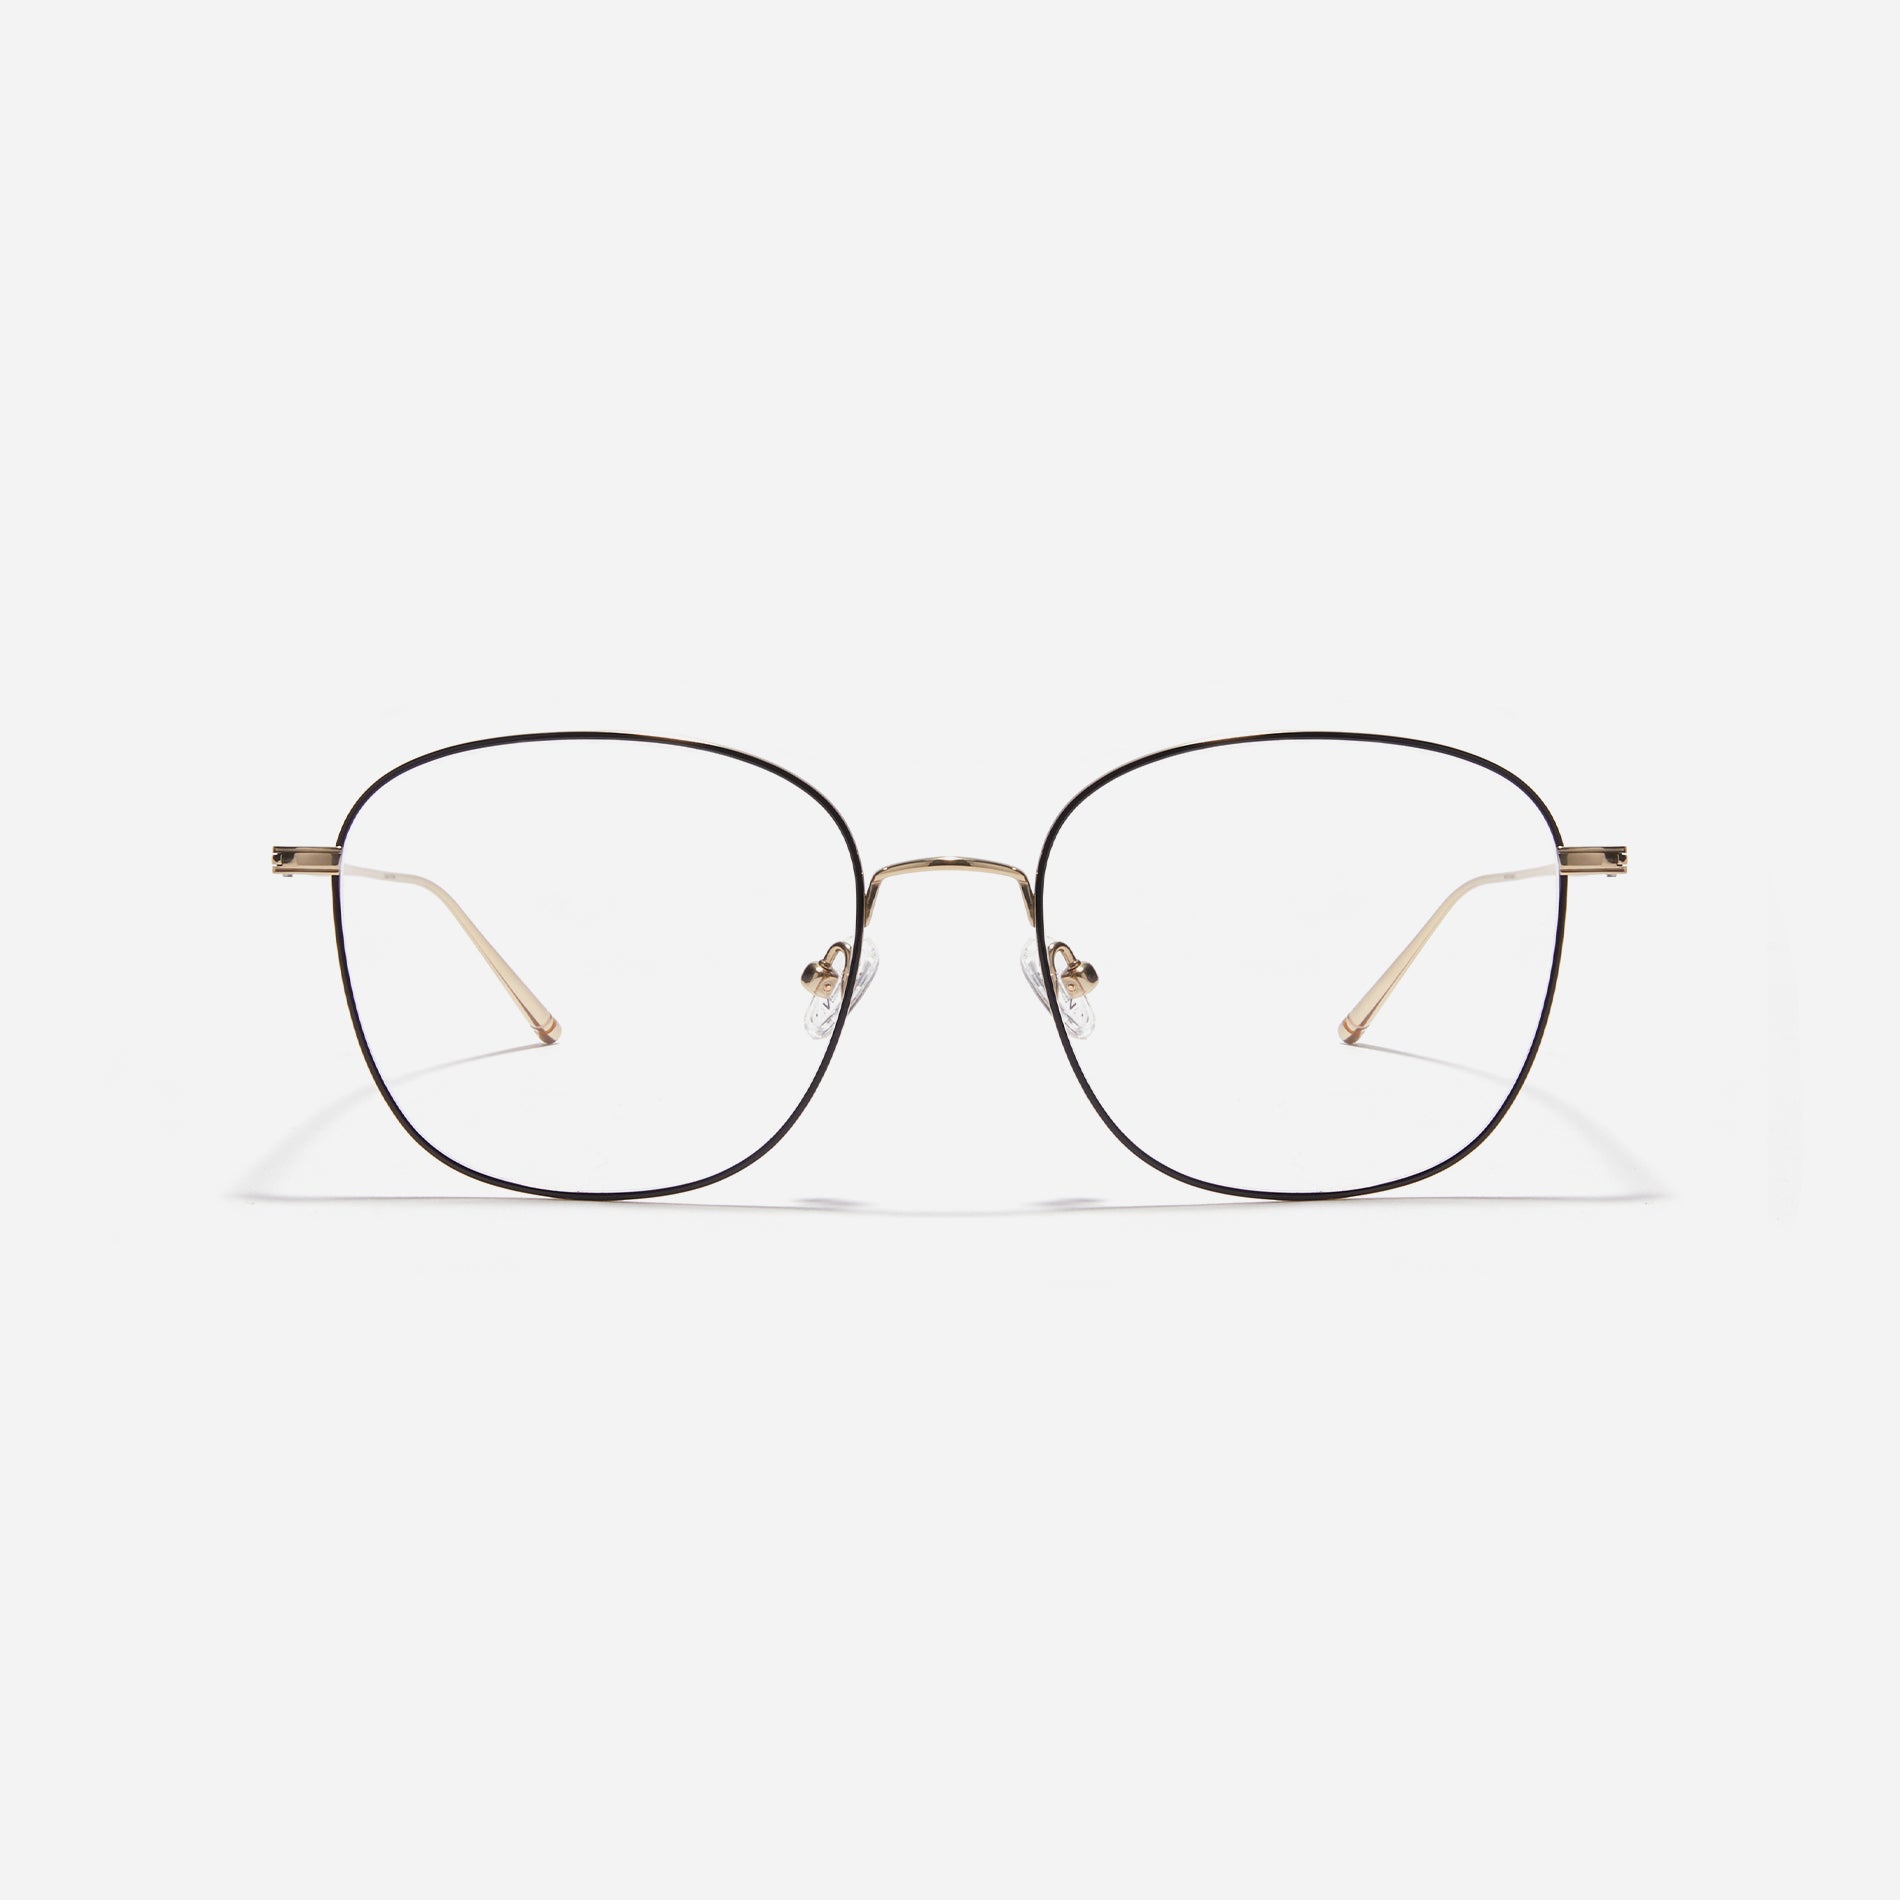 Square-shaped eyeglasses featuring distinctive oversized rims. Crafted entirely from titanium, they ensure a remarkably light and comfortable wearing experience.